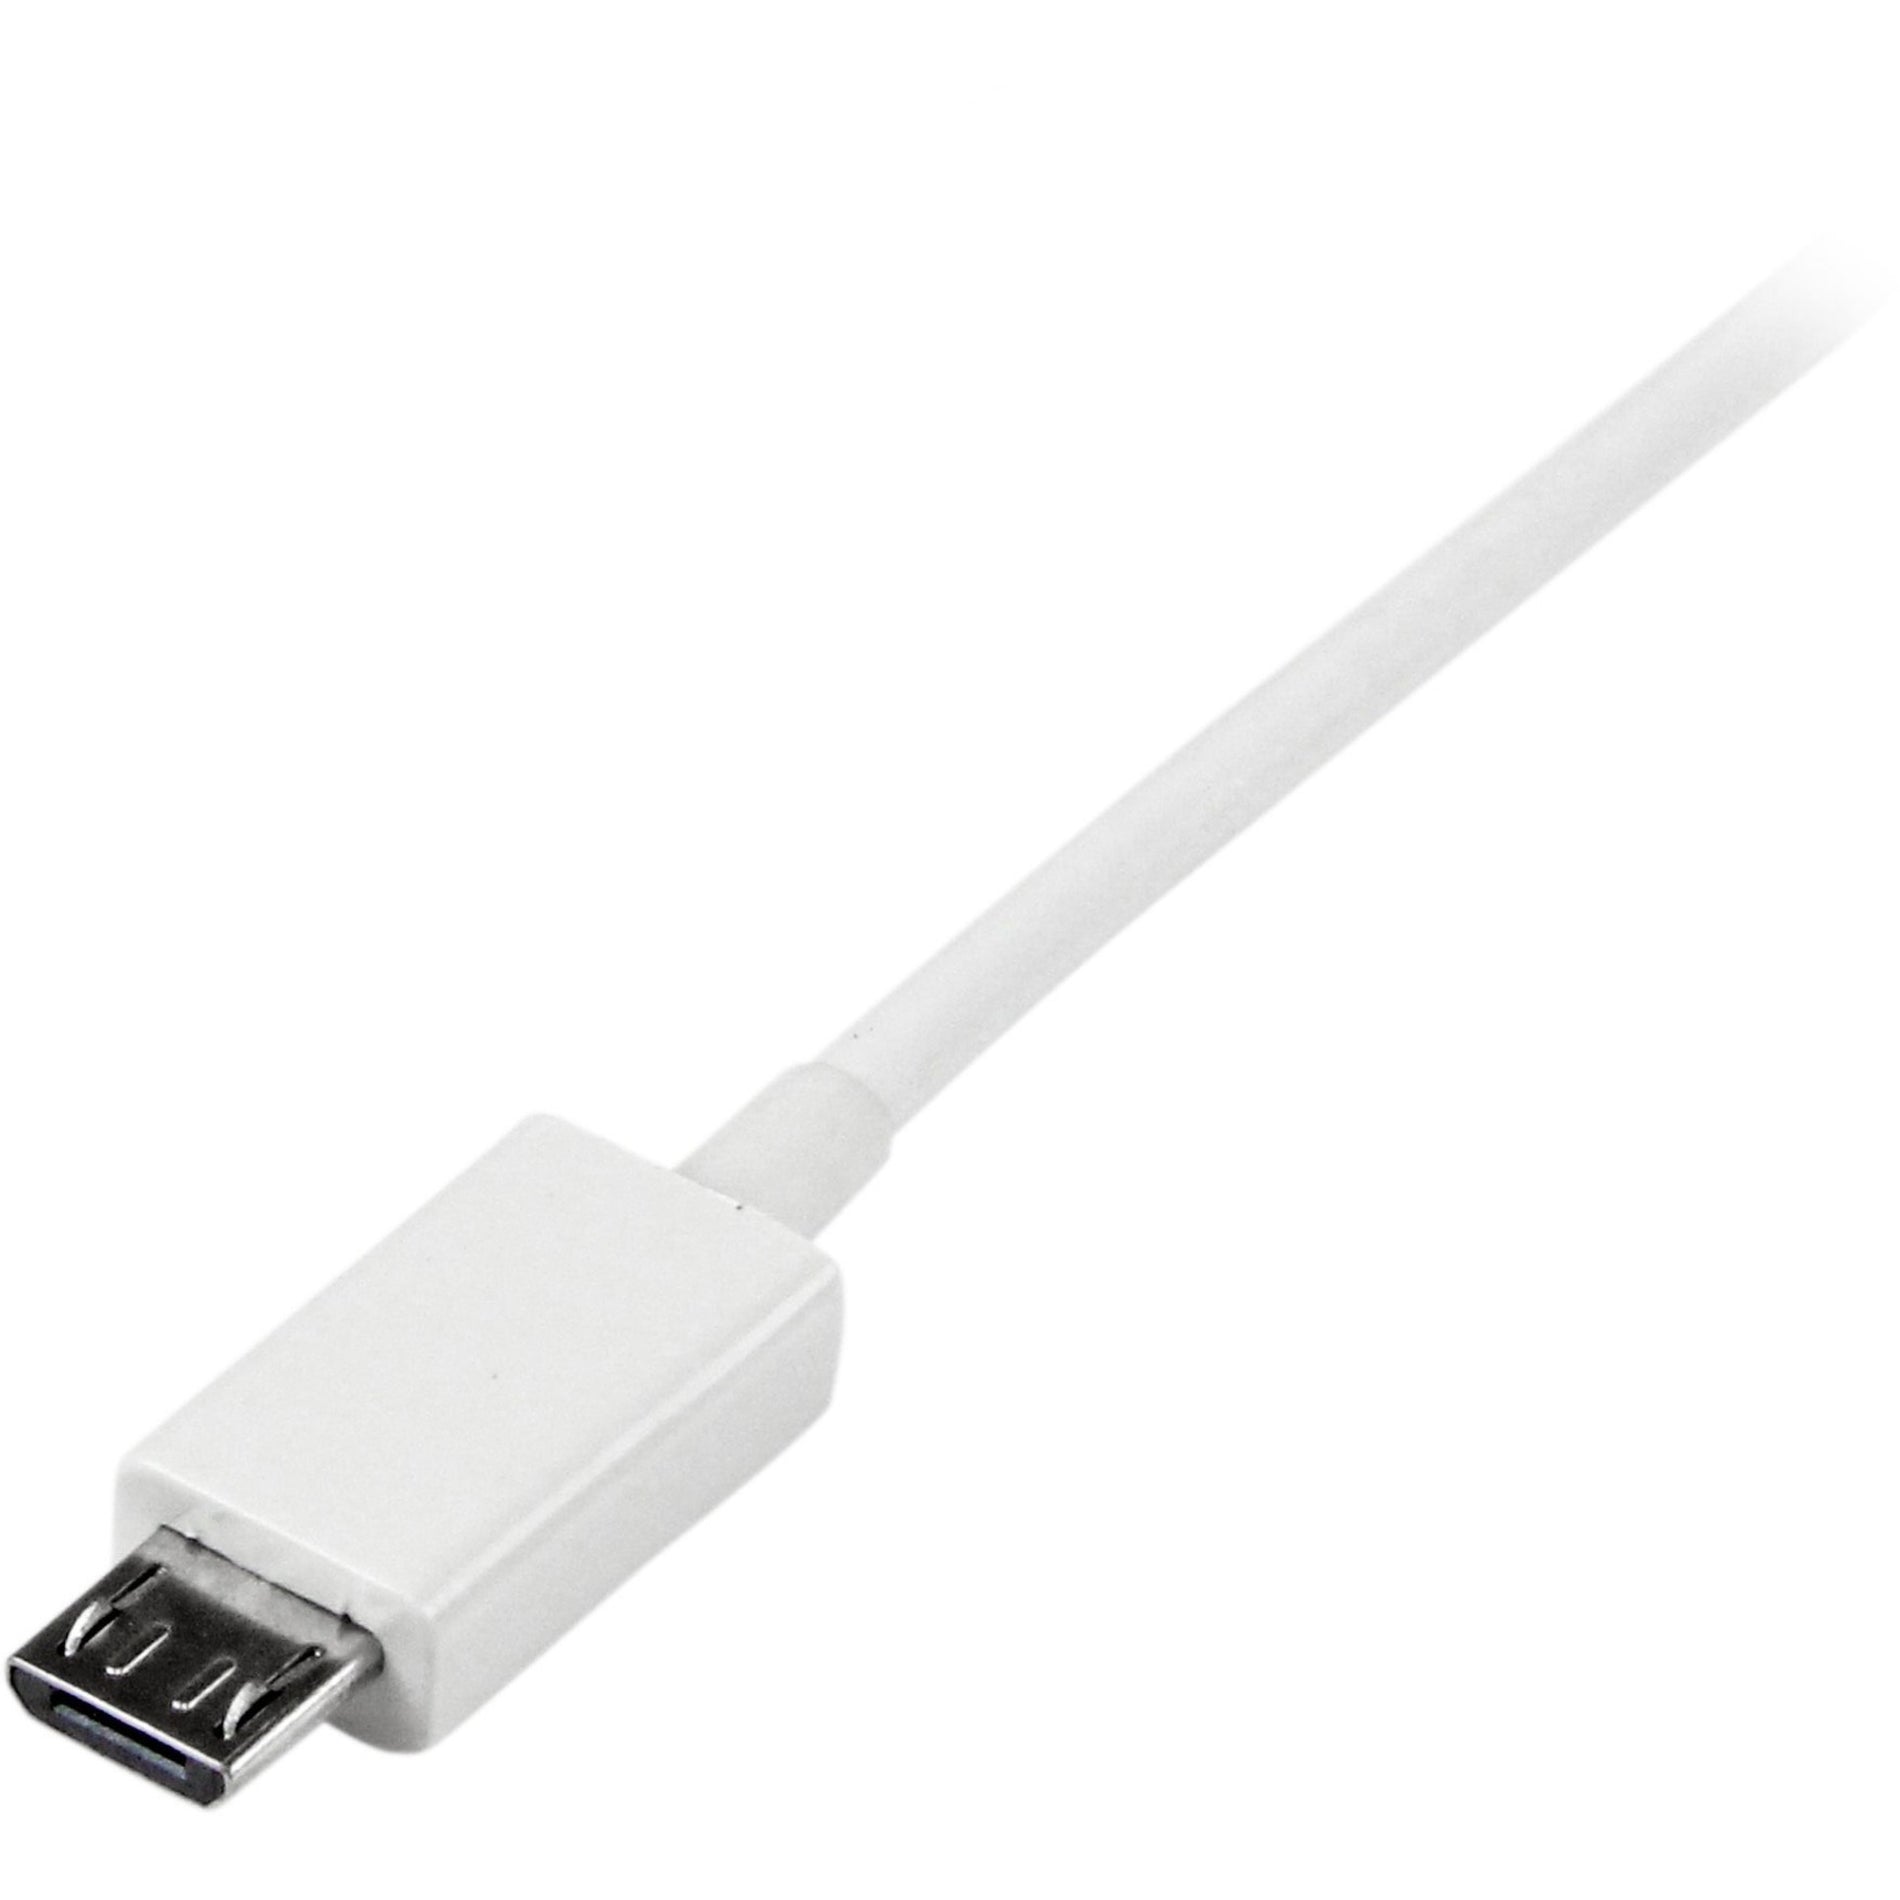 StarTech.com USBPAUB2MW 2m White Micro USB Cable - A to Micro B, Strain Relief, Molded, 480 Mbit/s Data Transfer Rate